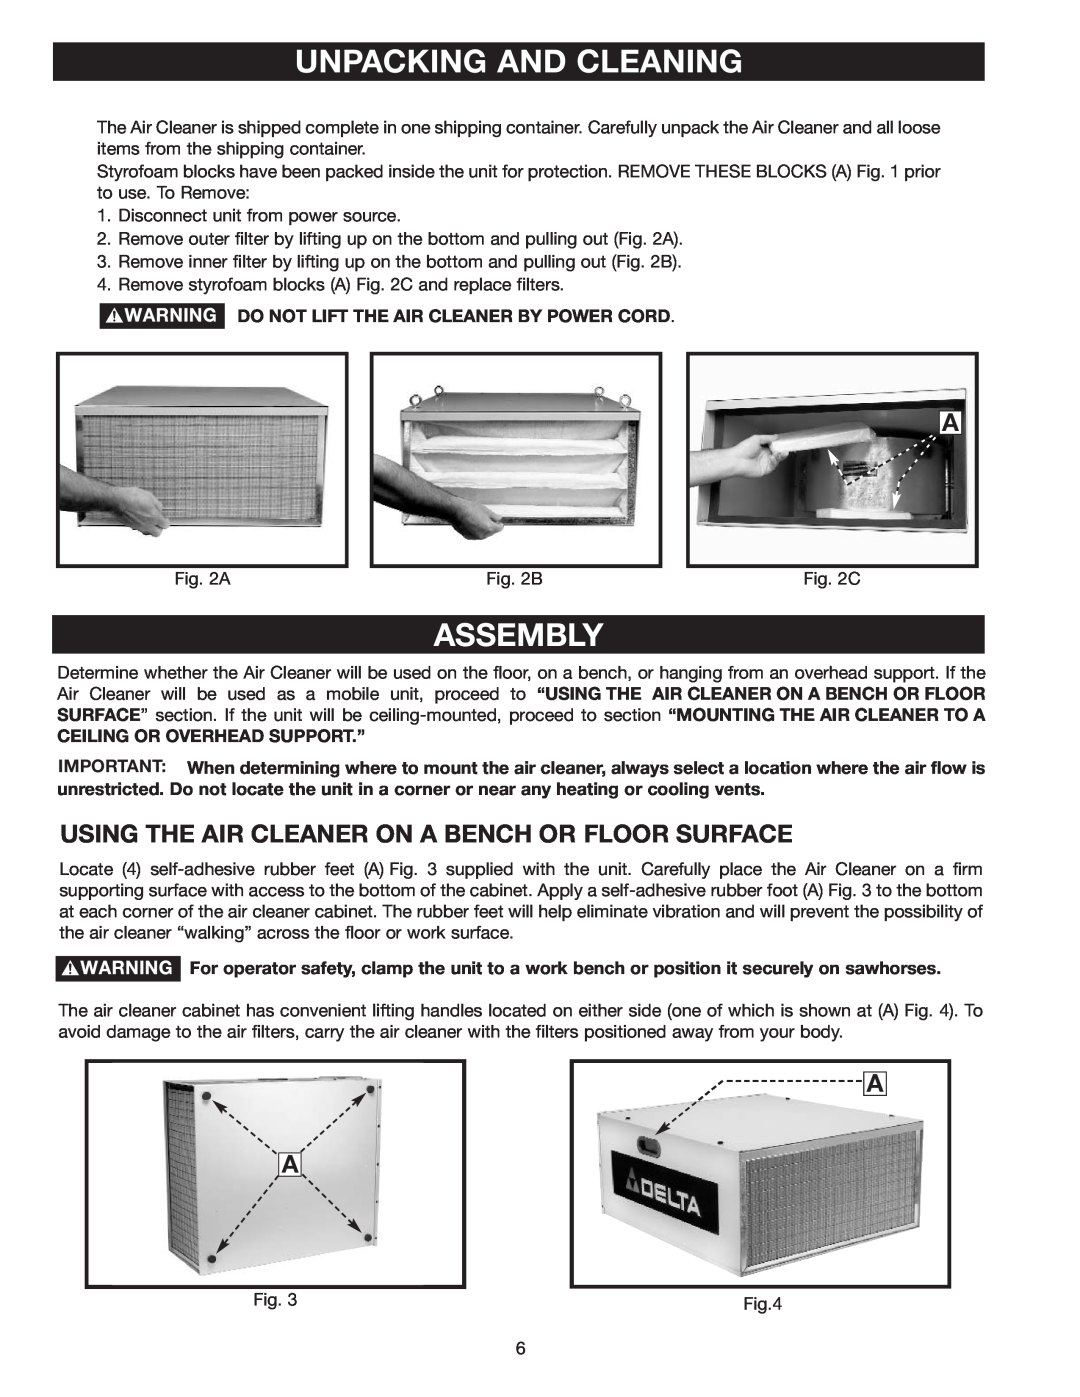 Delta 50-875 instruction manual Unpacking And Cleaning, Assembly, Using The Air Cleaner On A Bench Or Floor Surface 